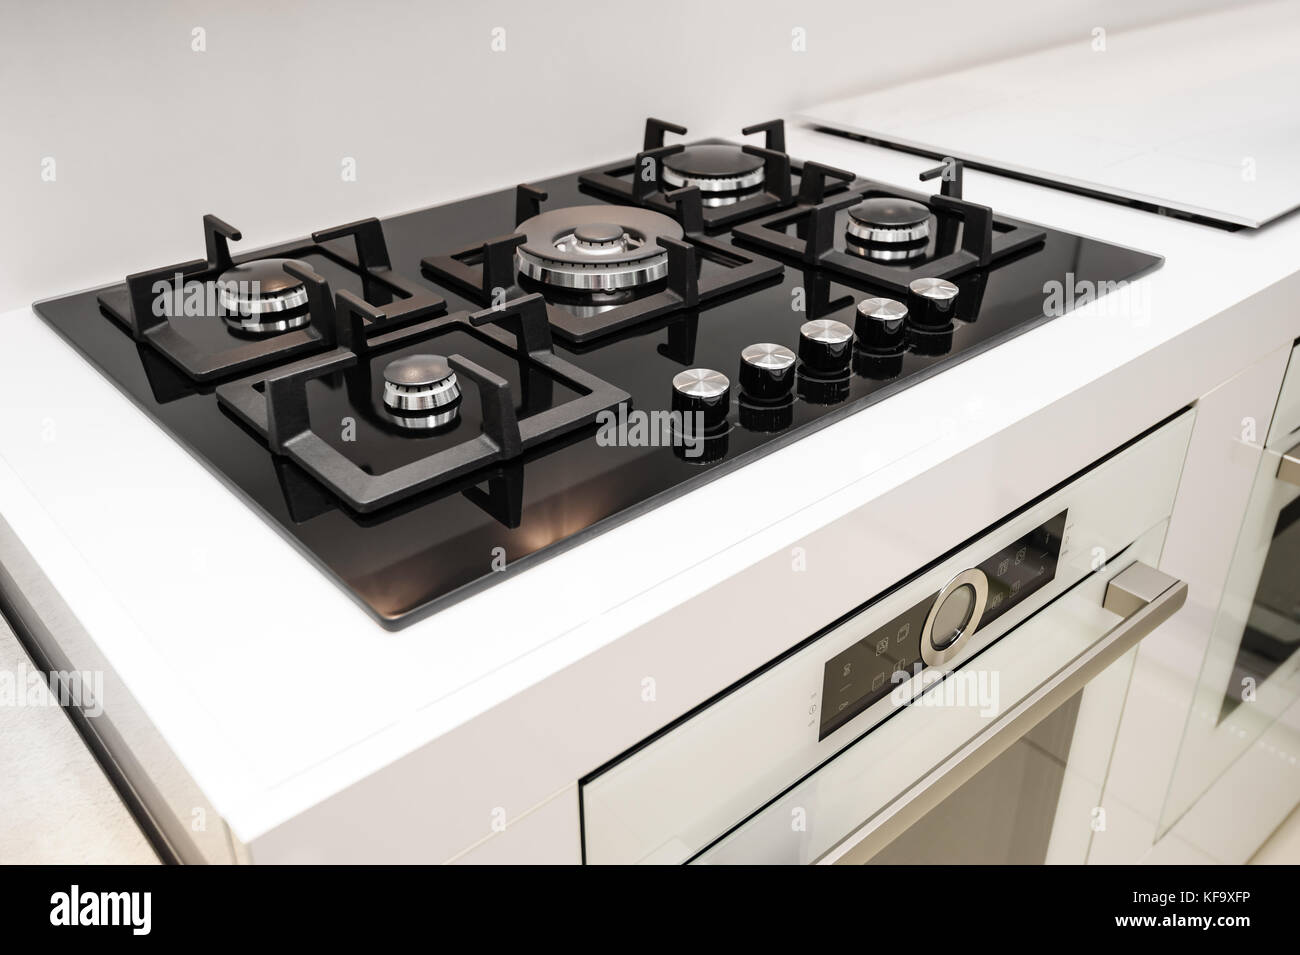 Brand new gas stove and embedded oven Stock Photo - Alamy